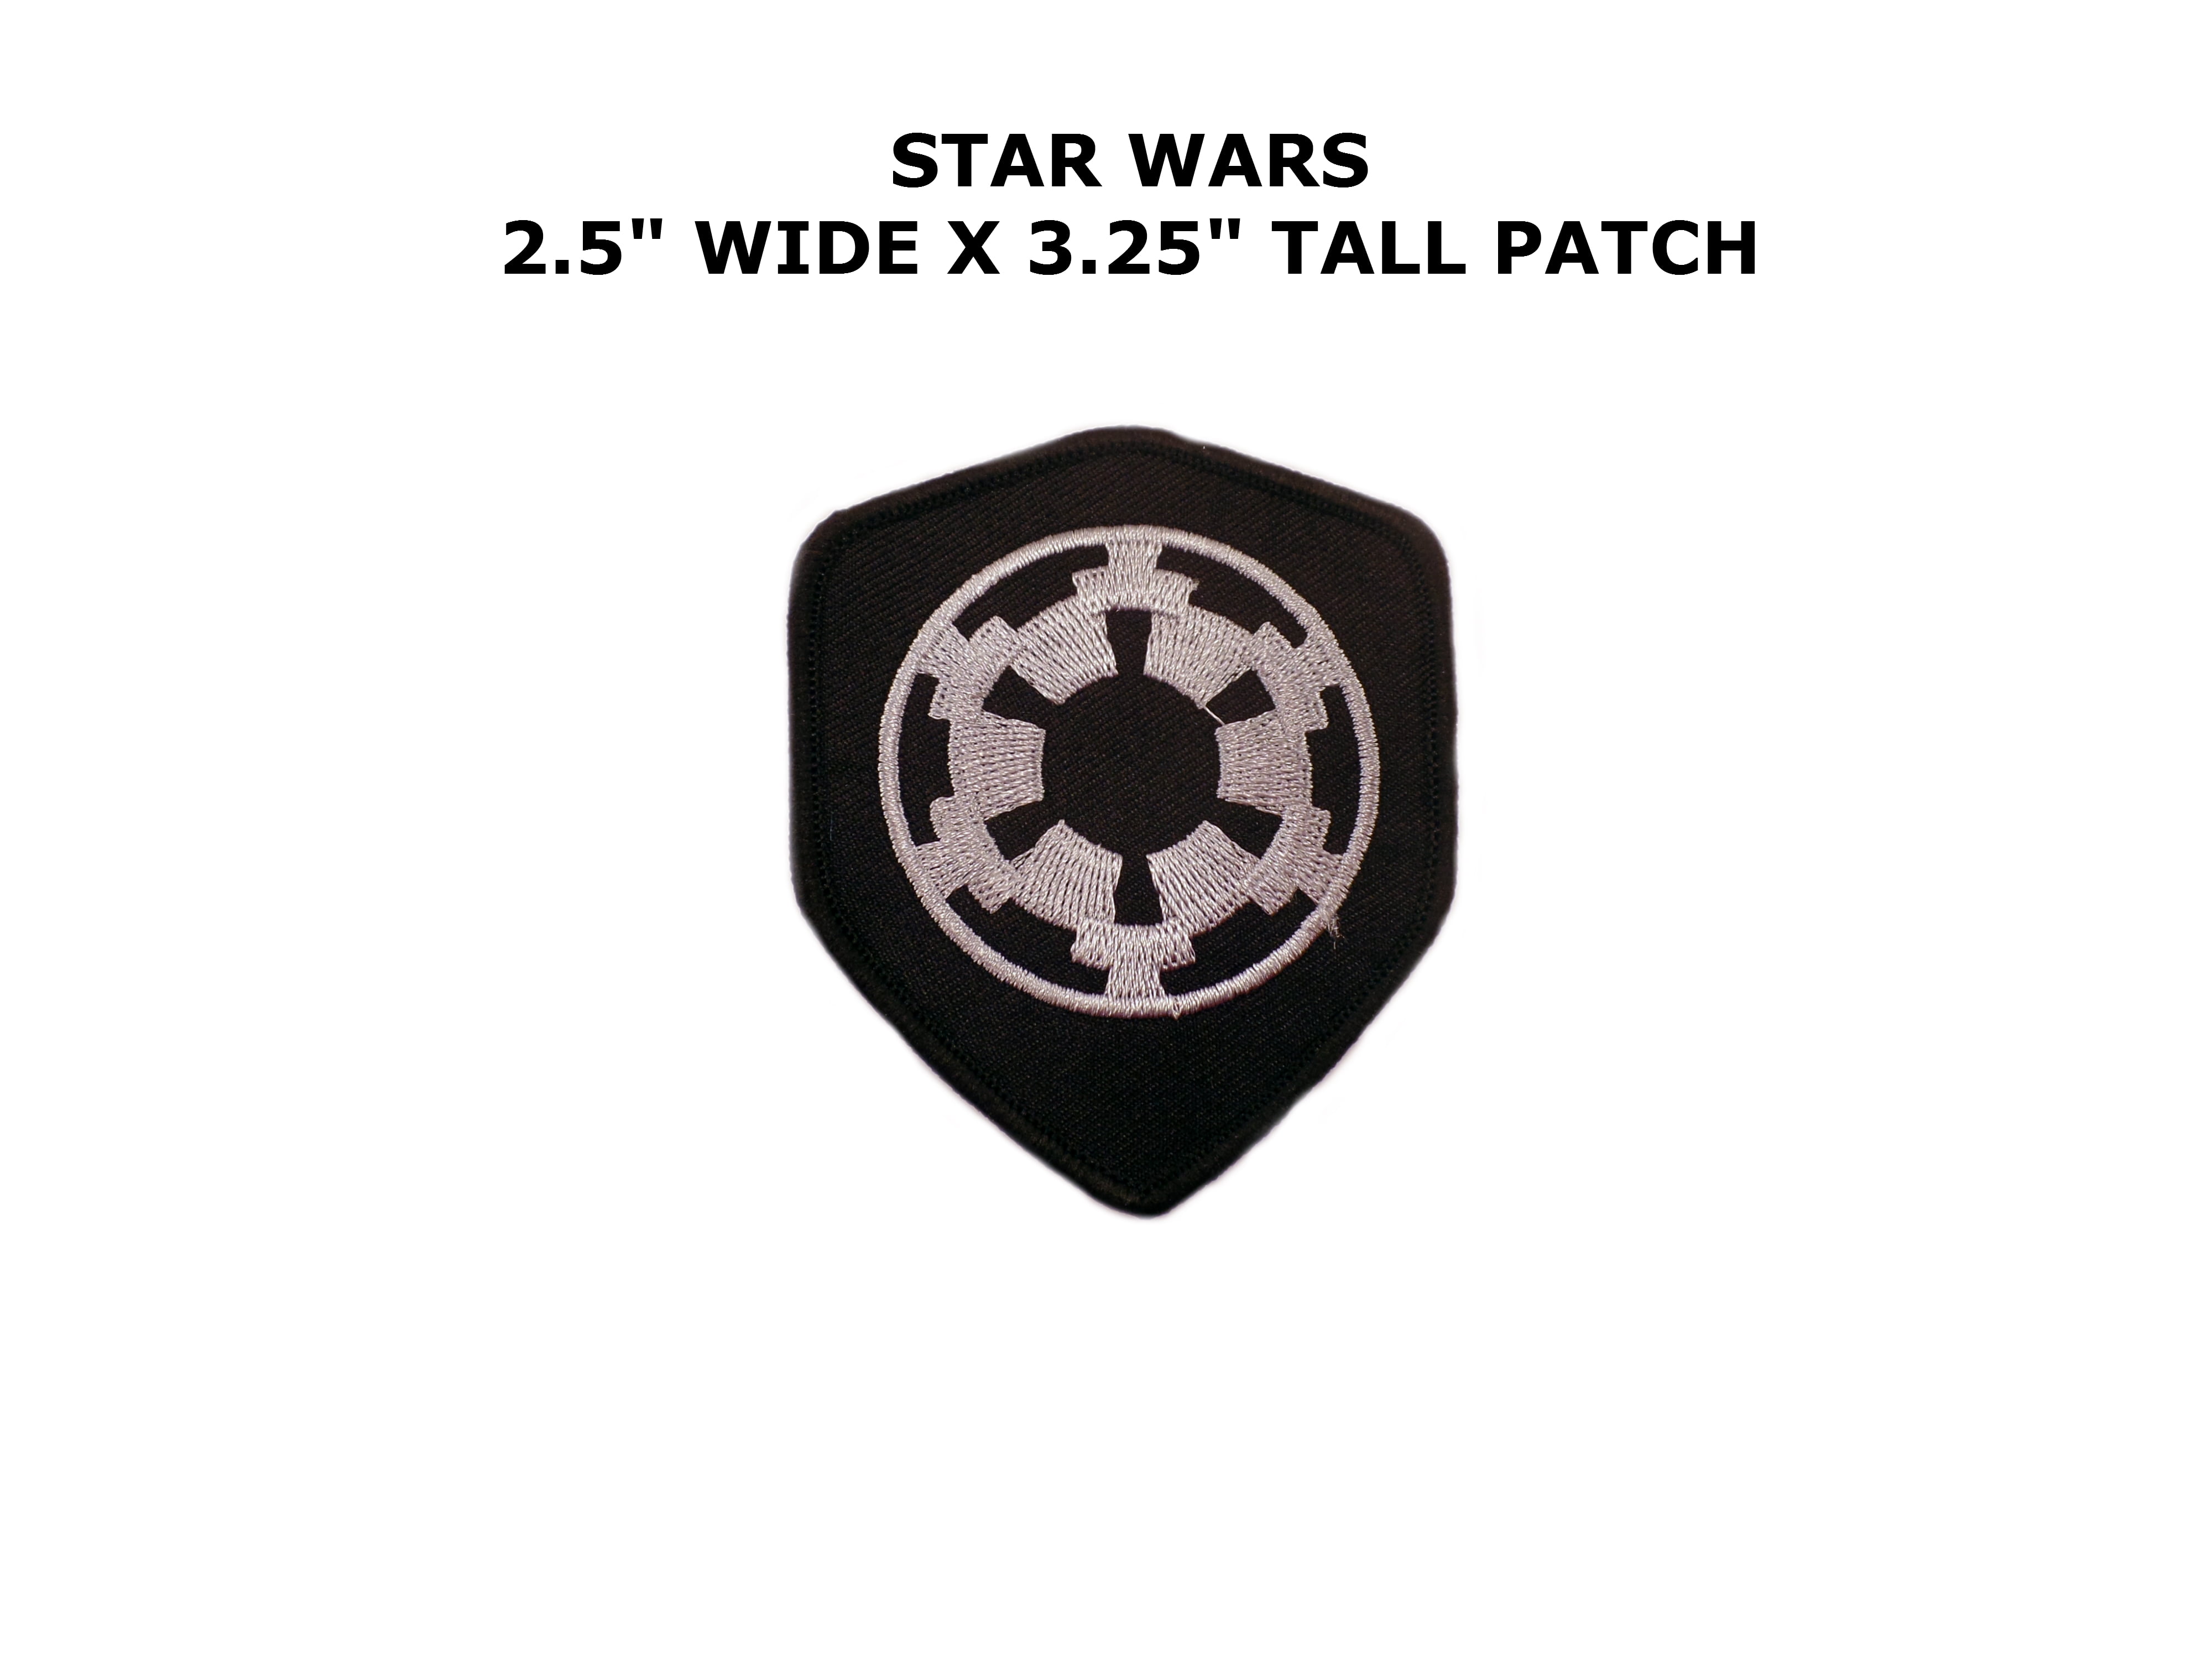 STAR WARS IMPERIAL FORCES COG LOGO JACKET 8" EMBROIDERED PATCH SWPA-COGJ 